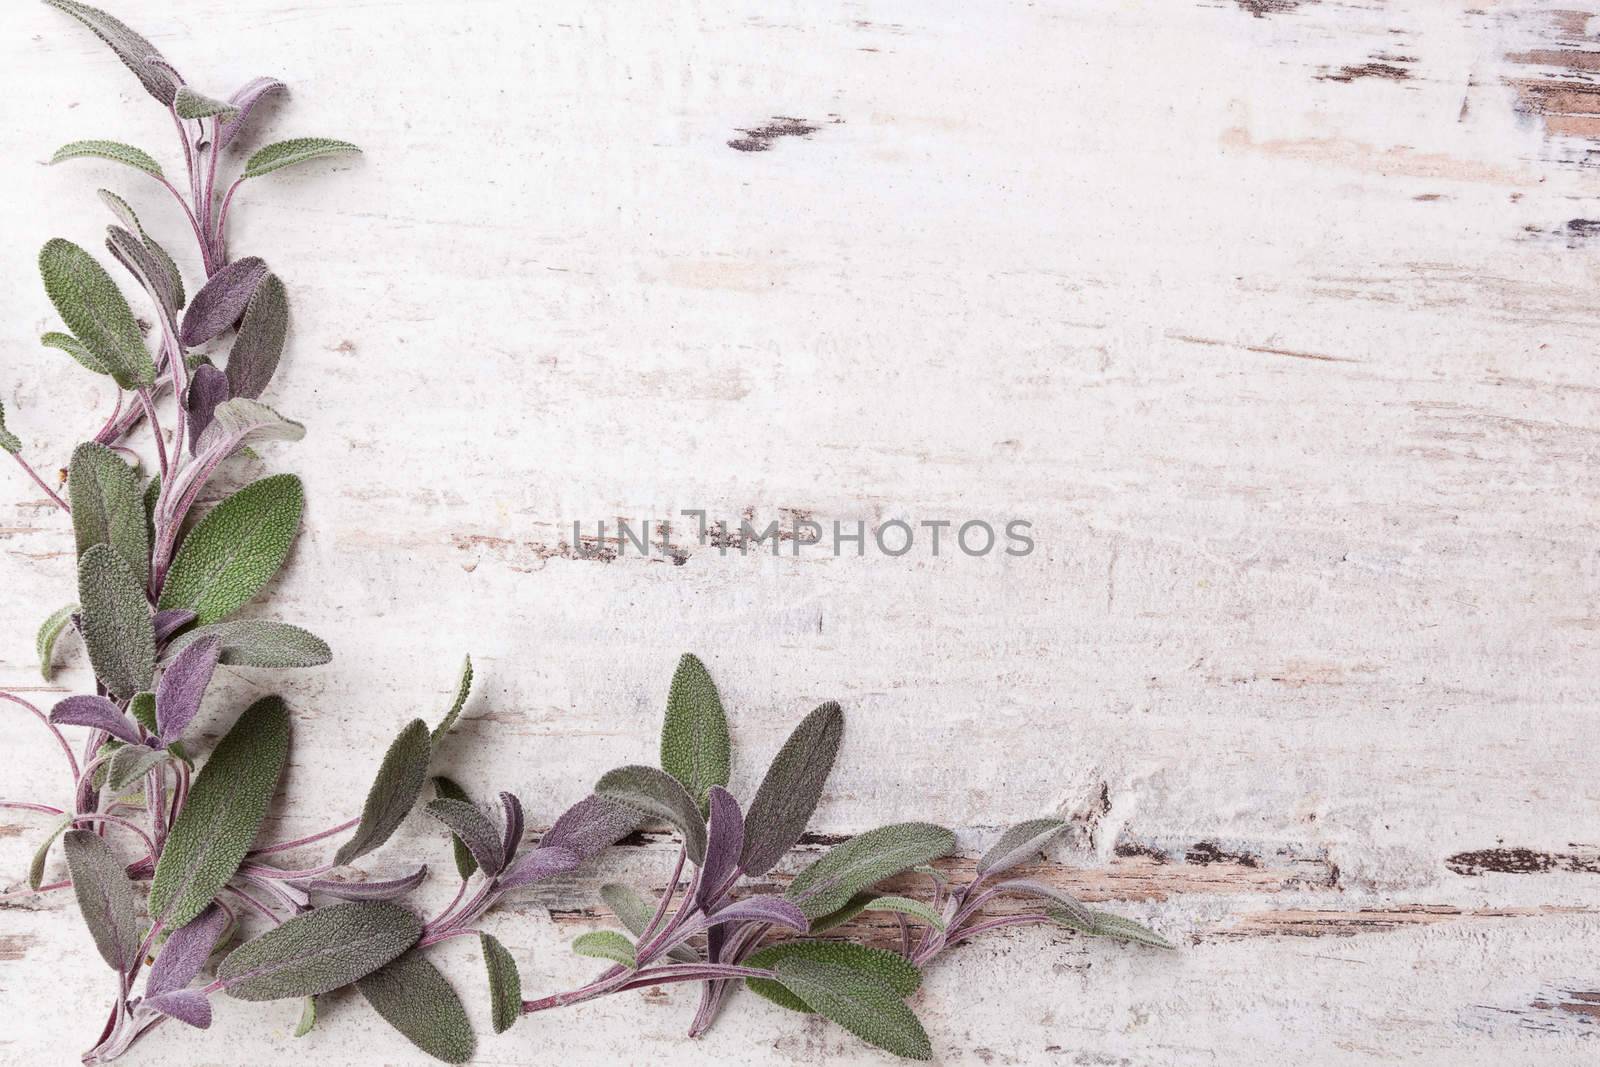 Sage herb on white wooden background with copy space. Alternative herbal medicine.